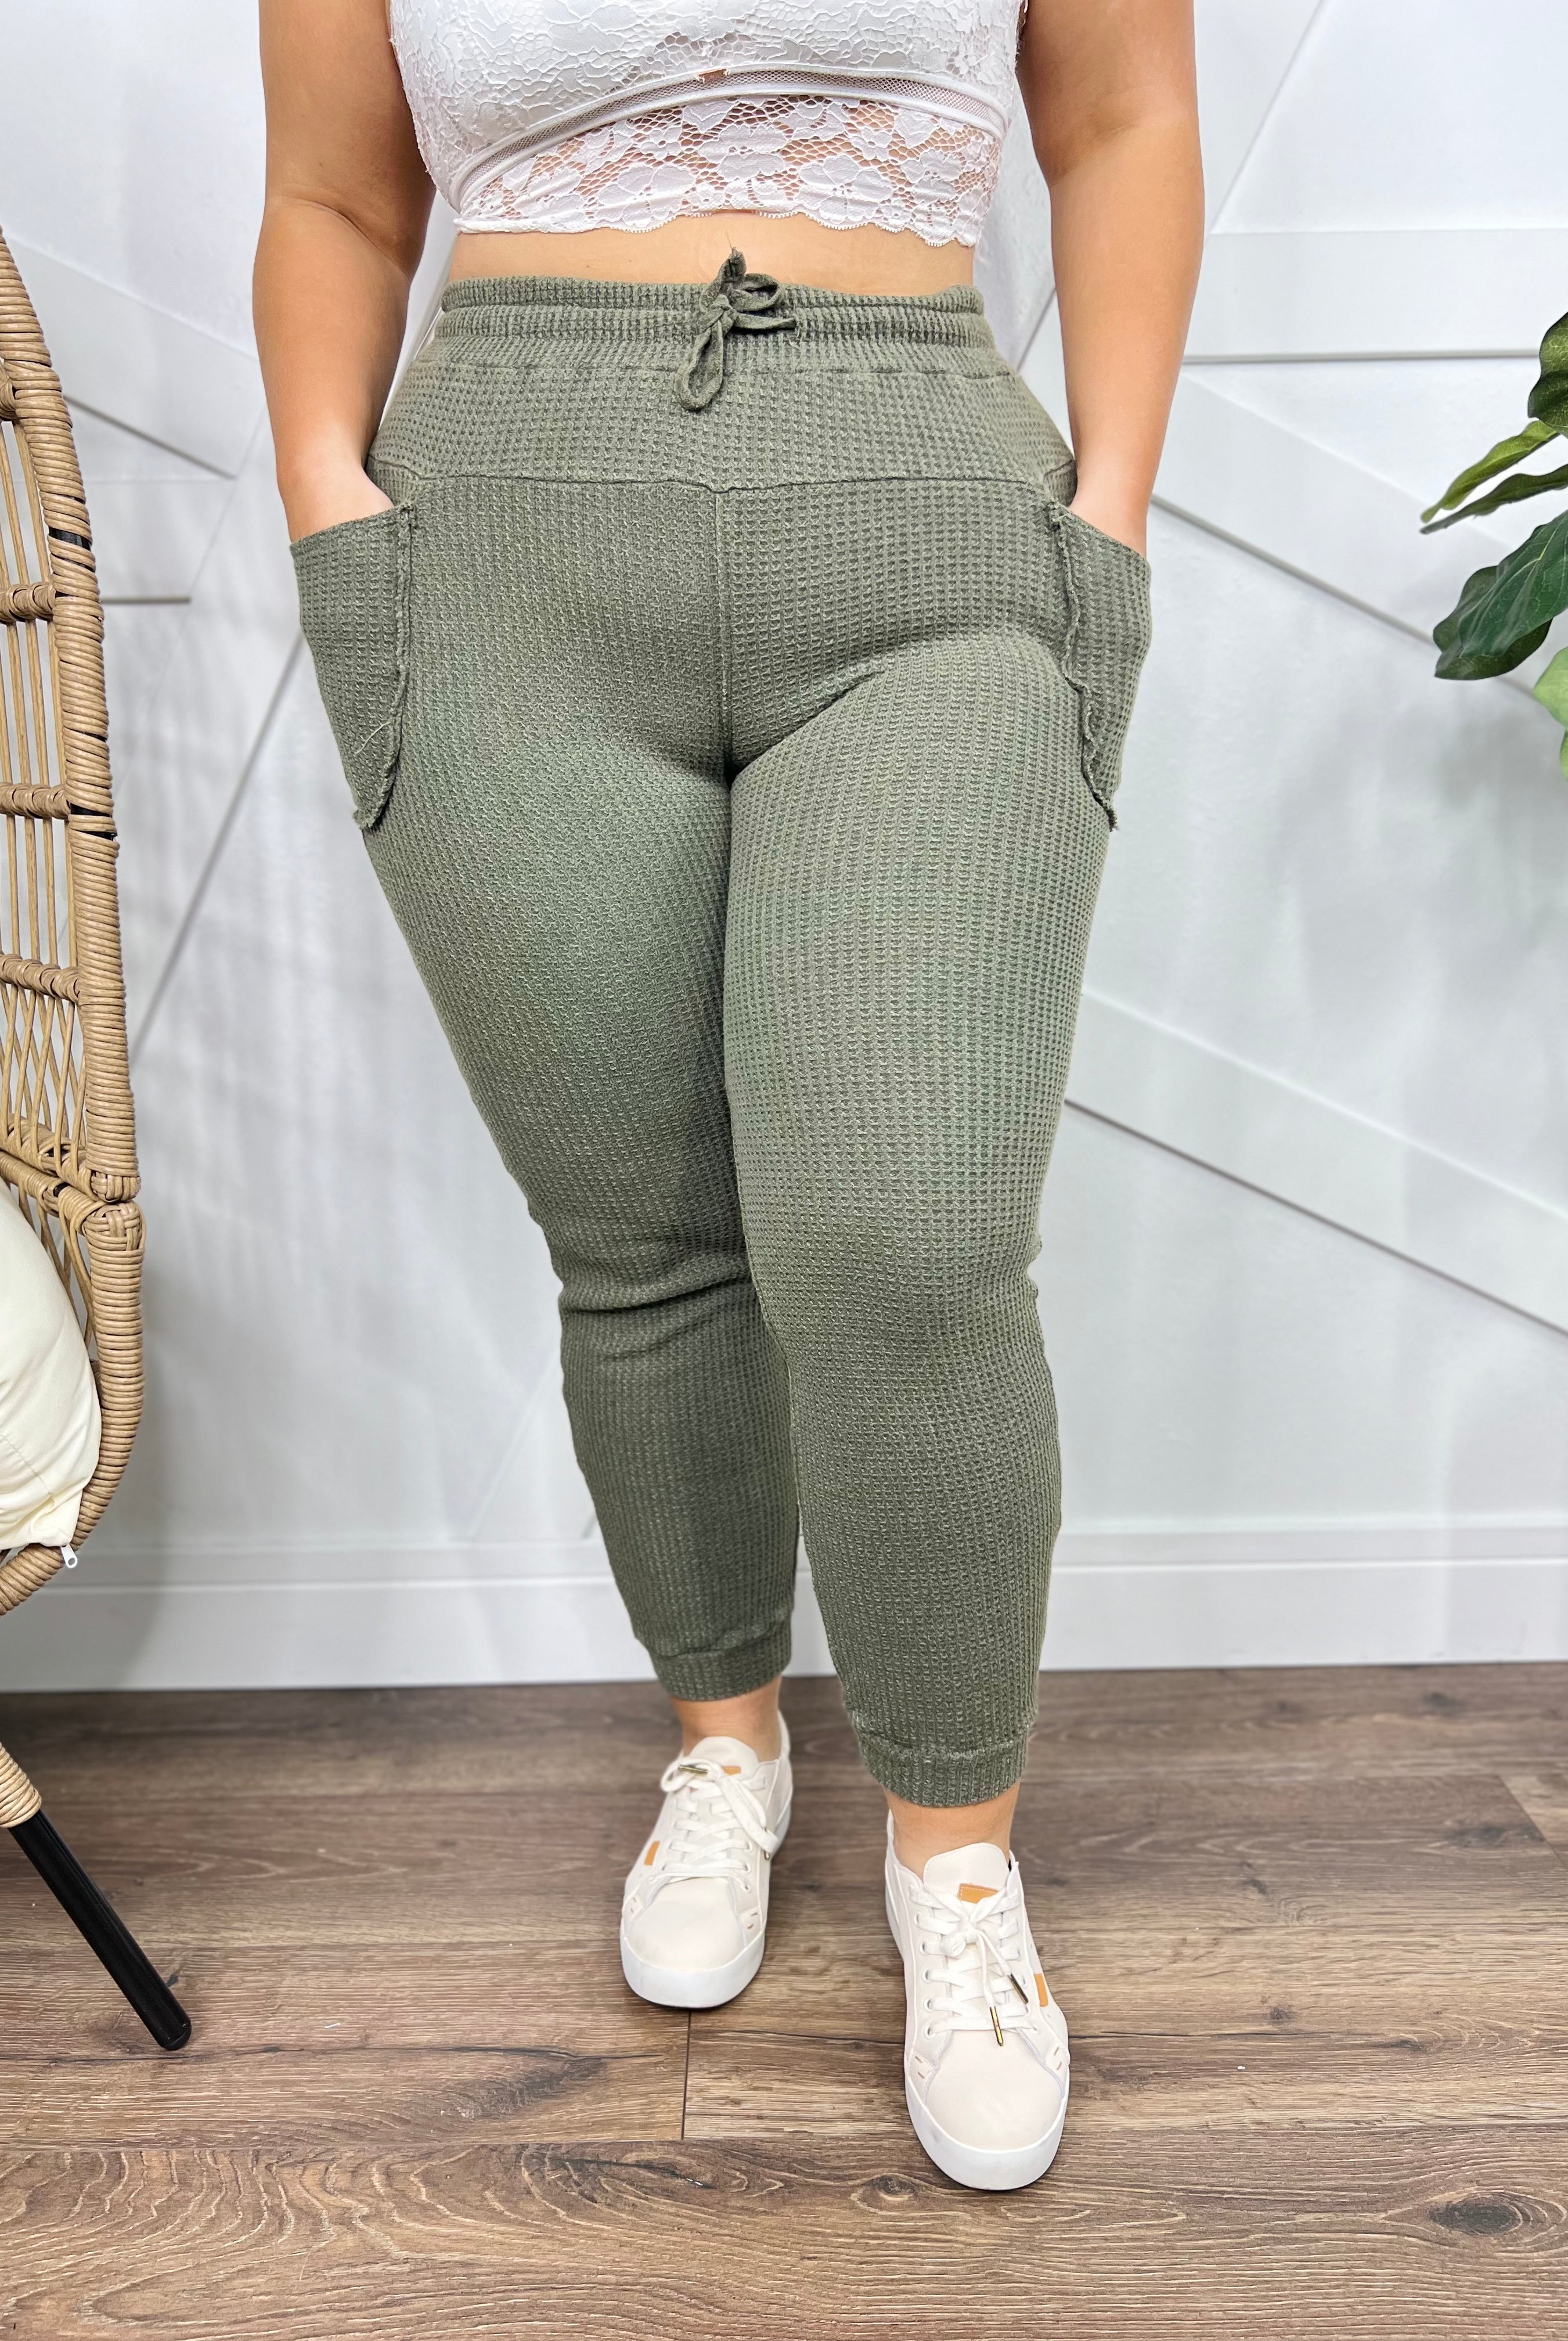 RESTOCK: Daily Lounge Jogger Pants-150 PANTS-Rae Mode-Heathered Boho Boutique, Women's Fashion and Accessories in Palmetto, FL